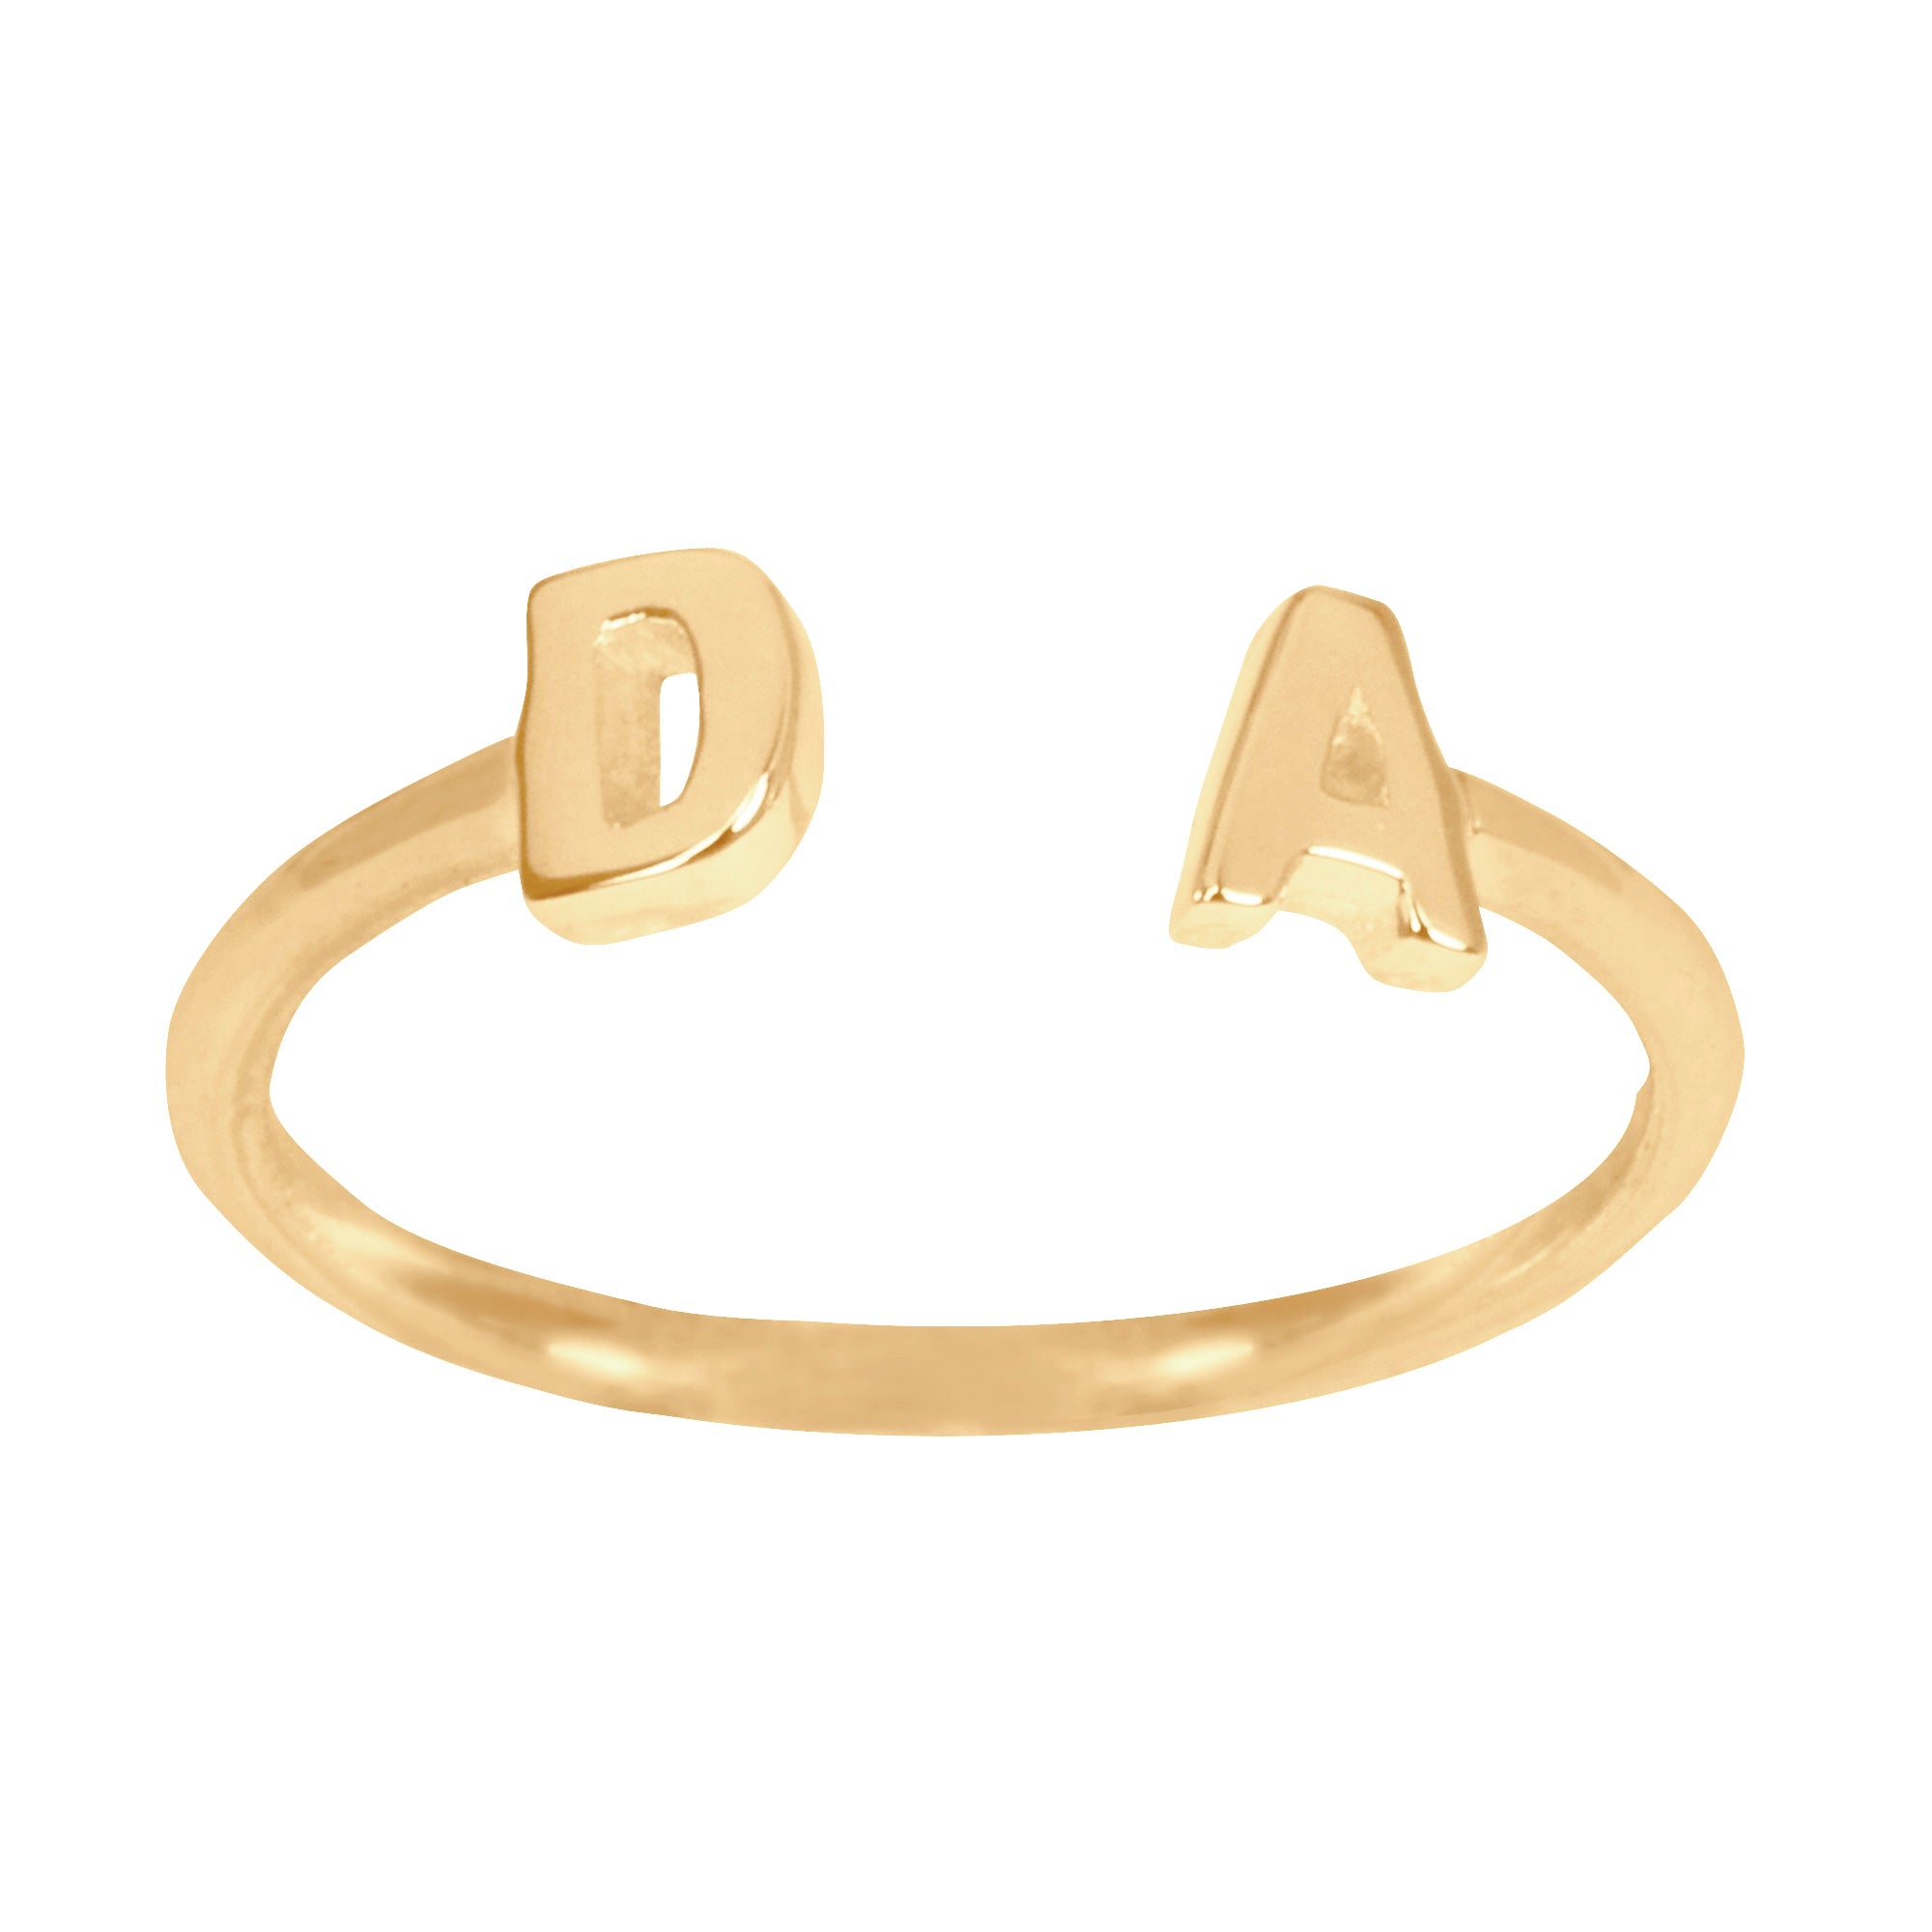 Personalized Initial Ring Gold Two Heart Initial Statement Ring - Etsy